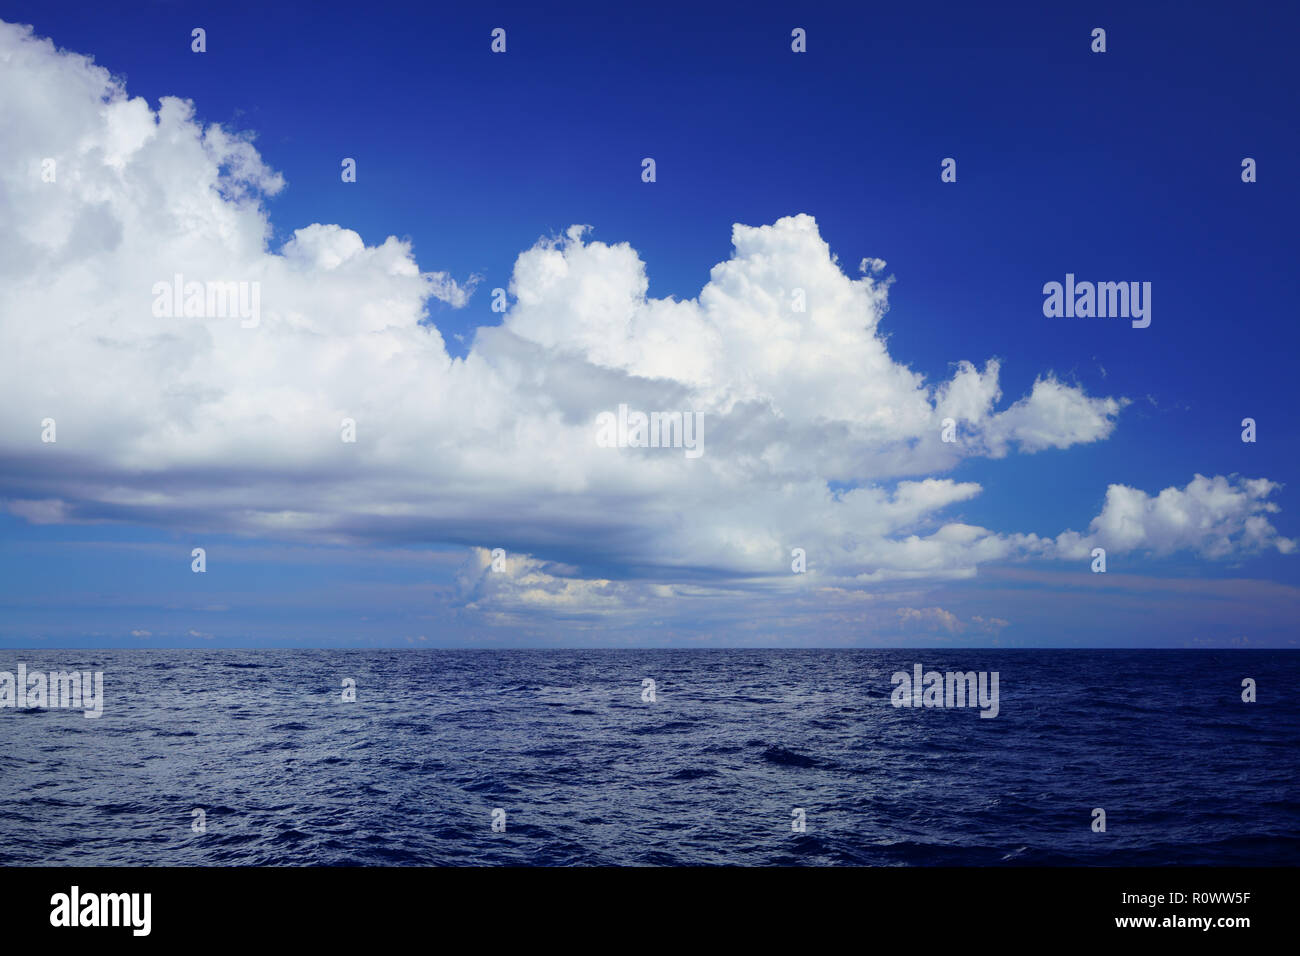 Cloudscape and deep blue waters of the Mediterranean Sea, off the coast of northern Majorca, Spain. Maritime open sea background. Stock Photo